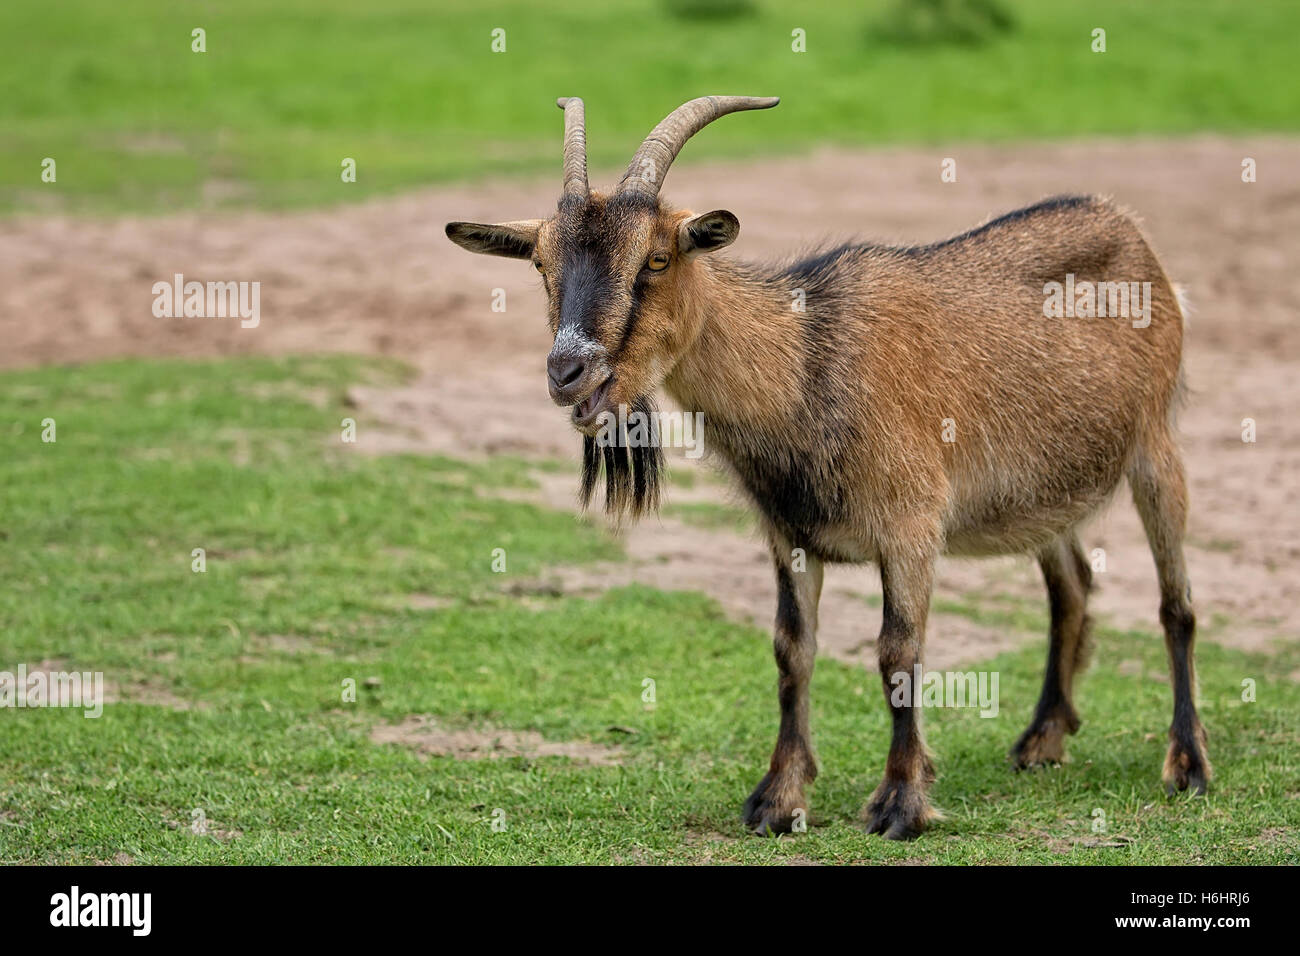 Goat in a clearing in the wild Stock Photo